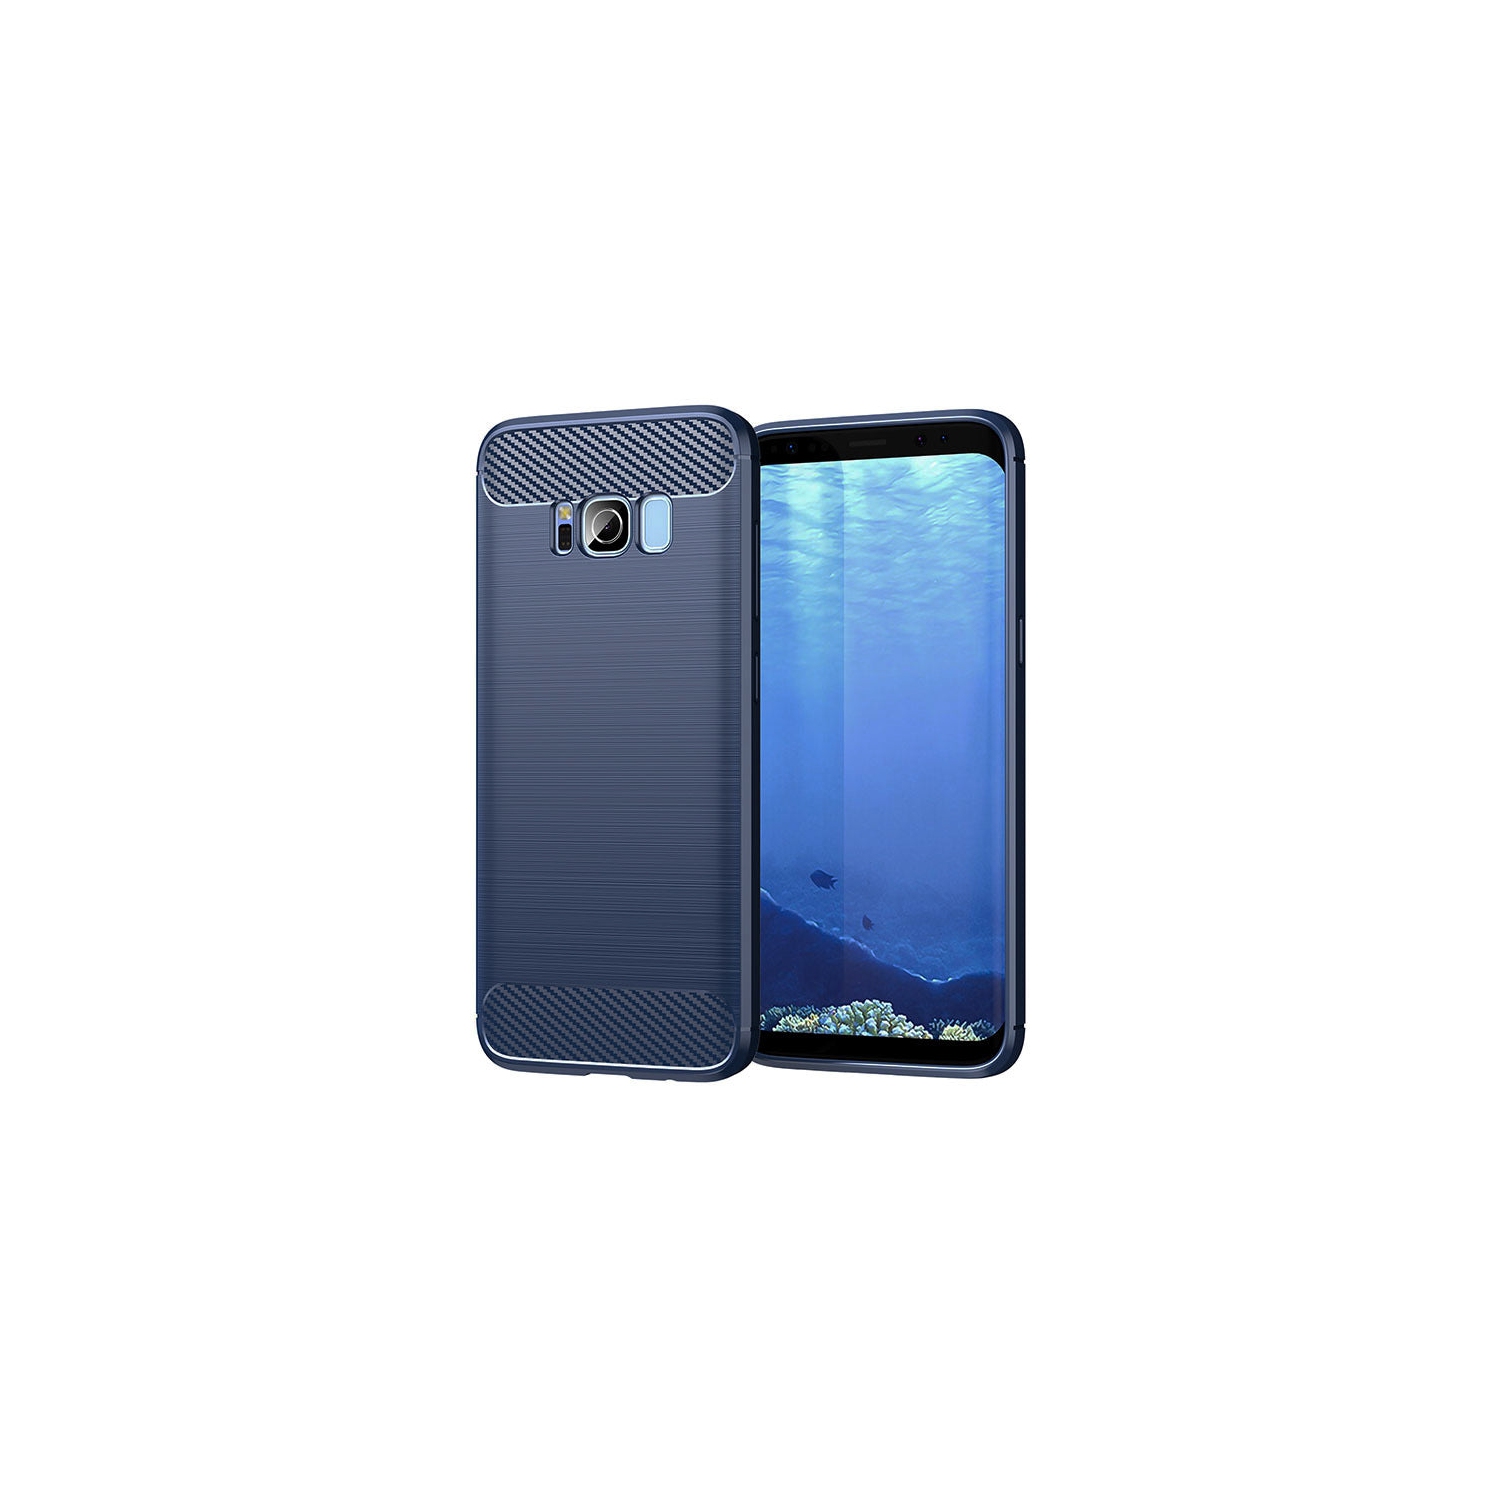 PANDACO Navy Brushed Metal Case for Samsung Galaxy S8